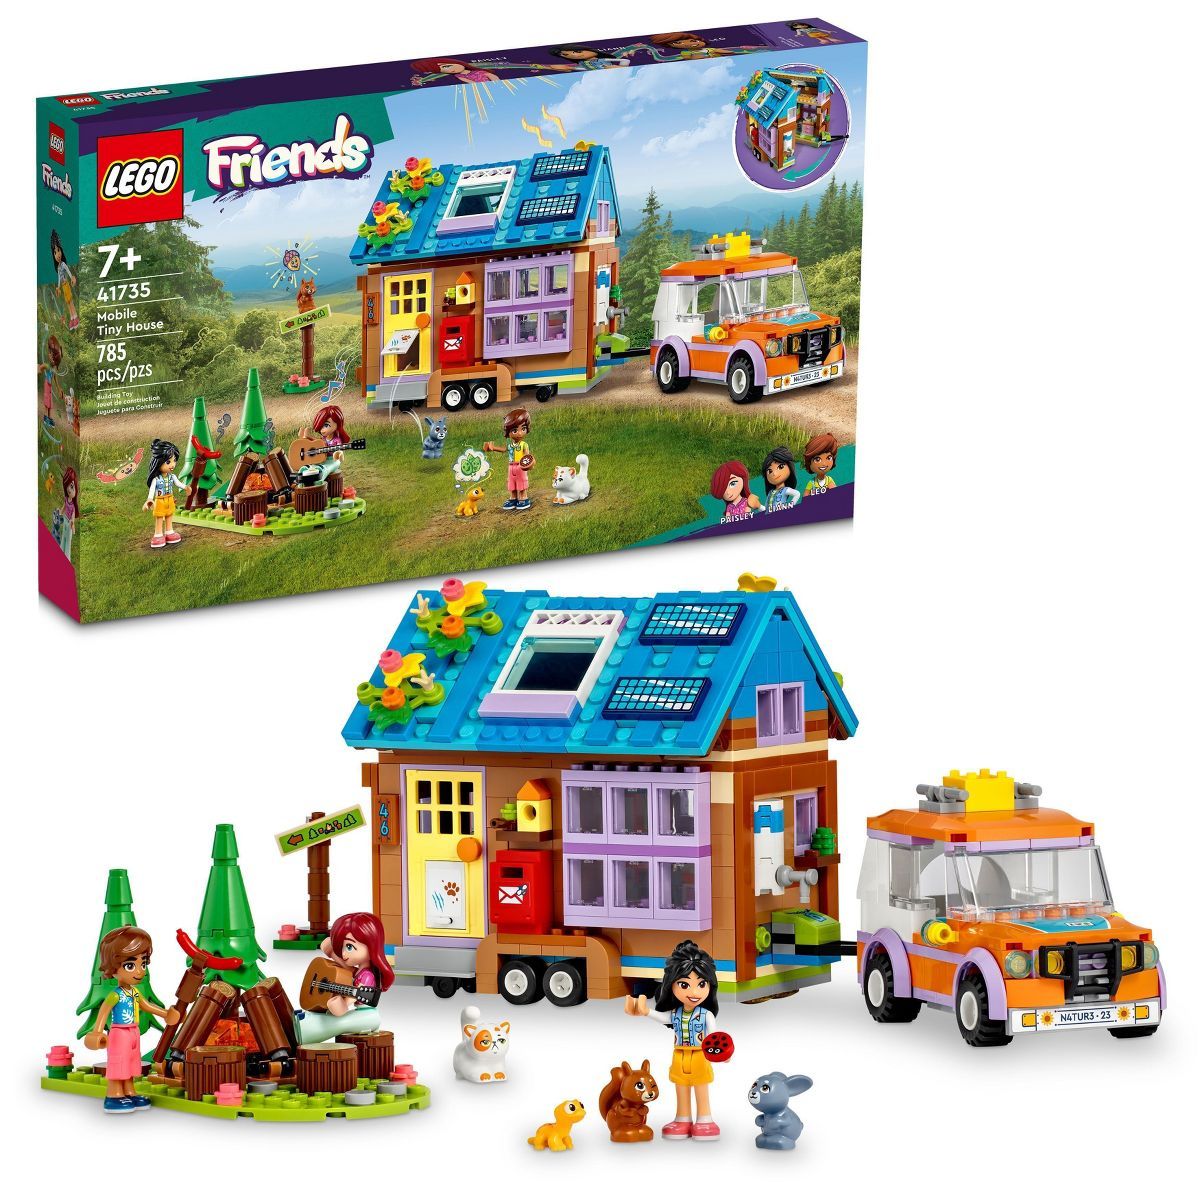 LEGO Friends Mobile Tiny House Playset with Toy Car 41735 | Target